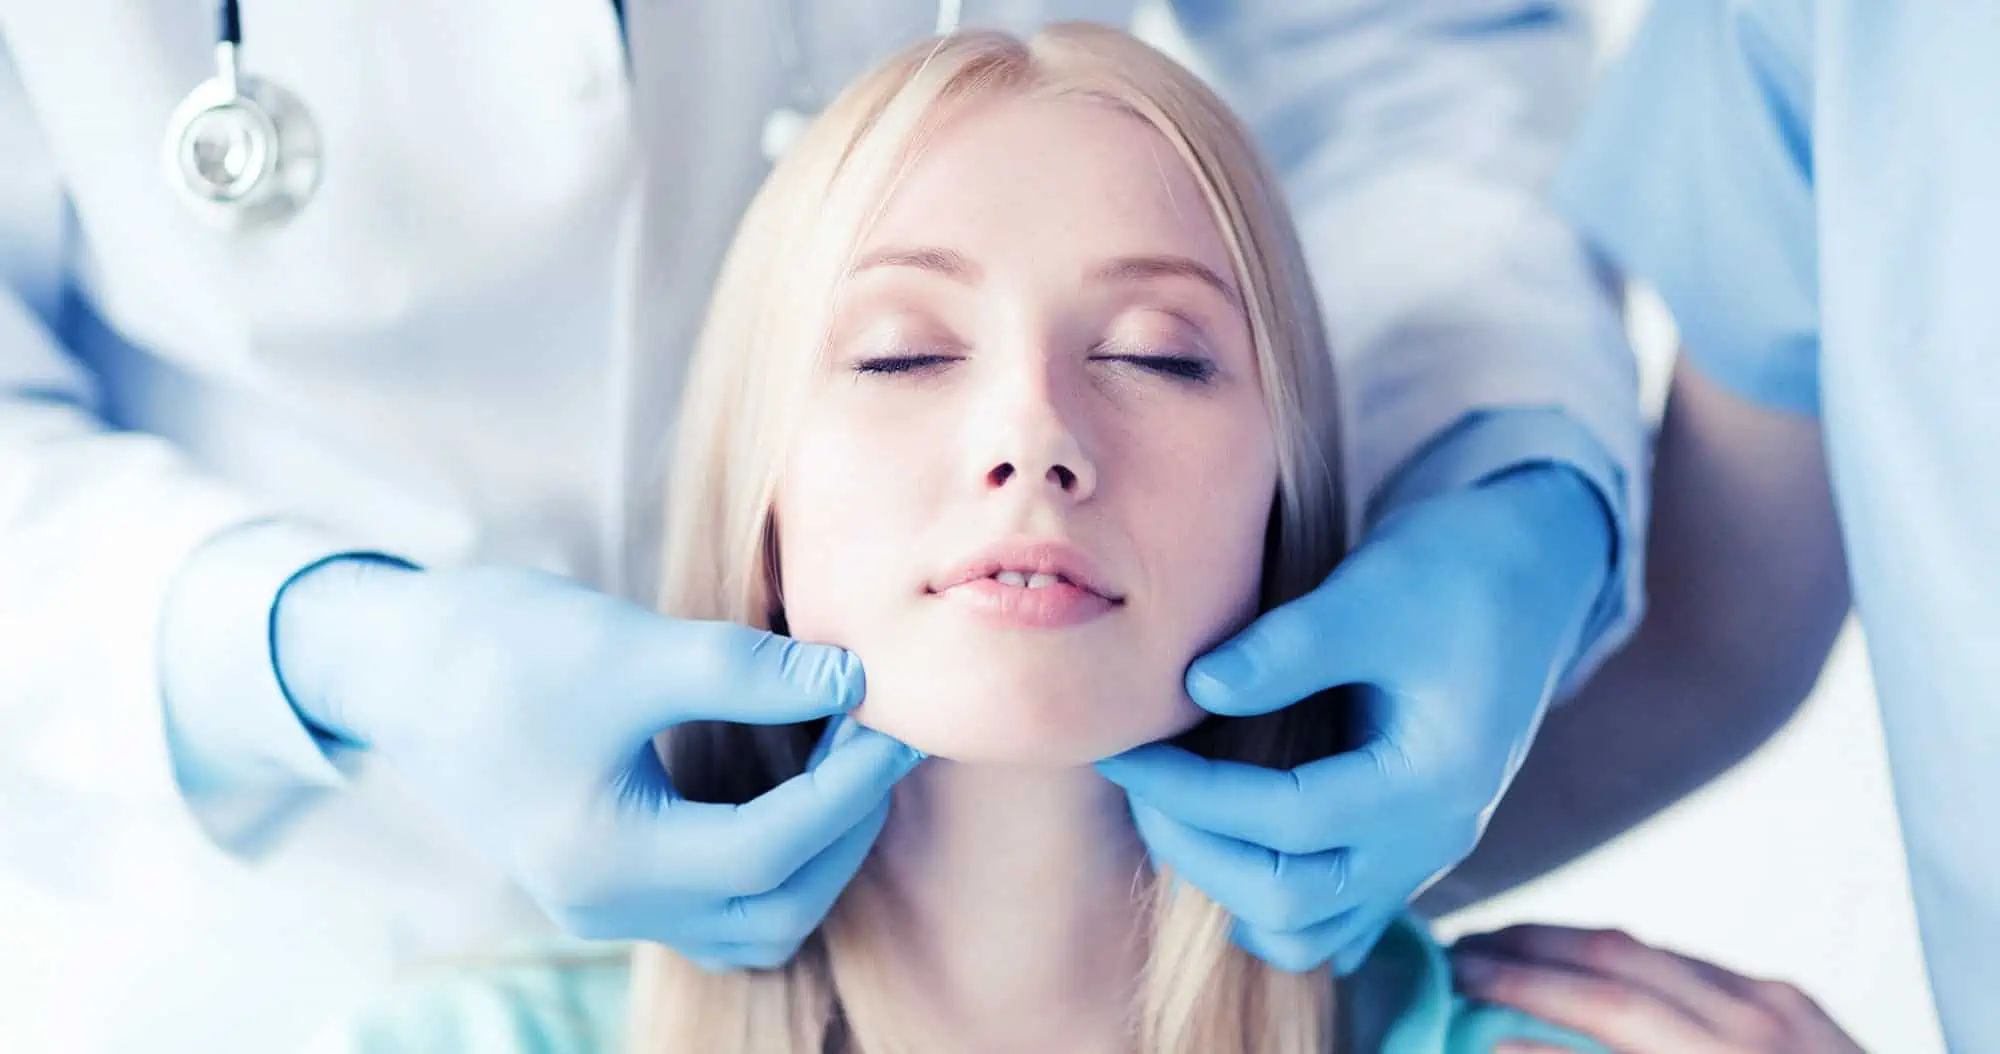 A young female patient's jawline is assessed by a skilled doctor wearing blue gloves.